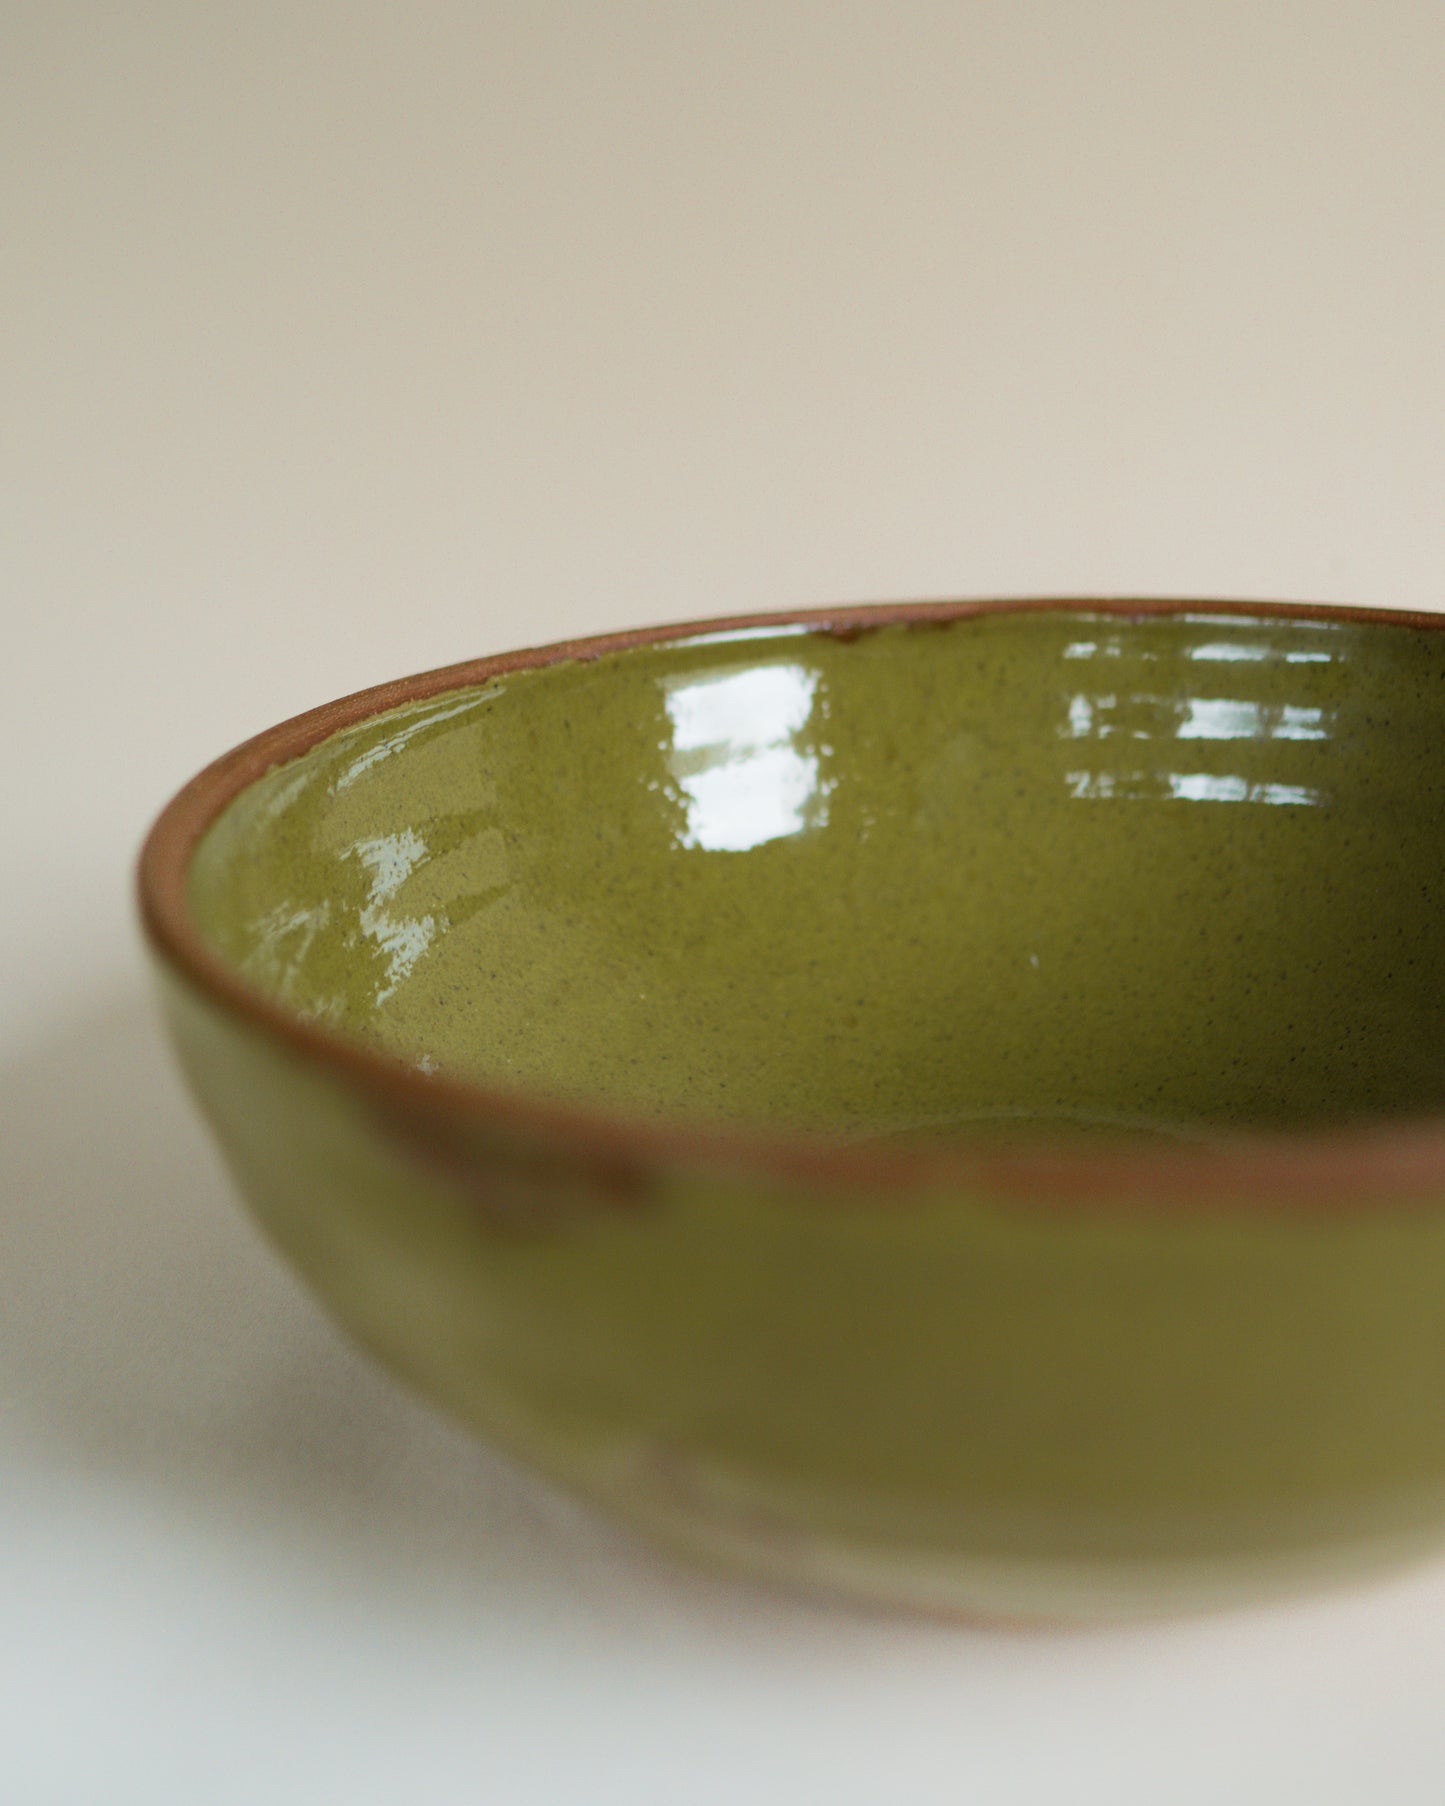 the Serving Bowl